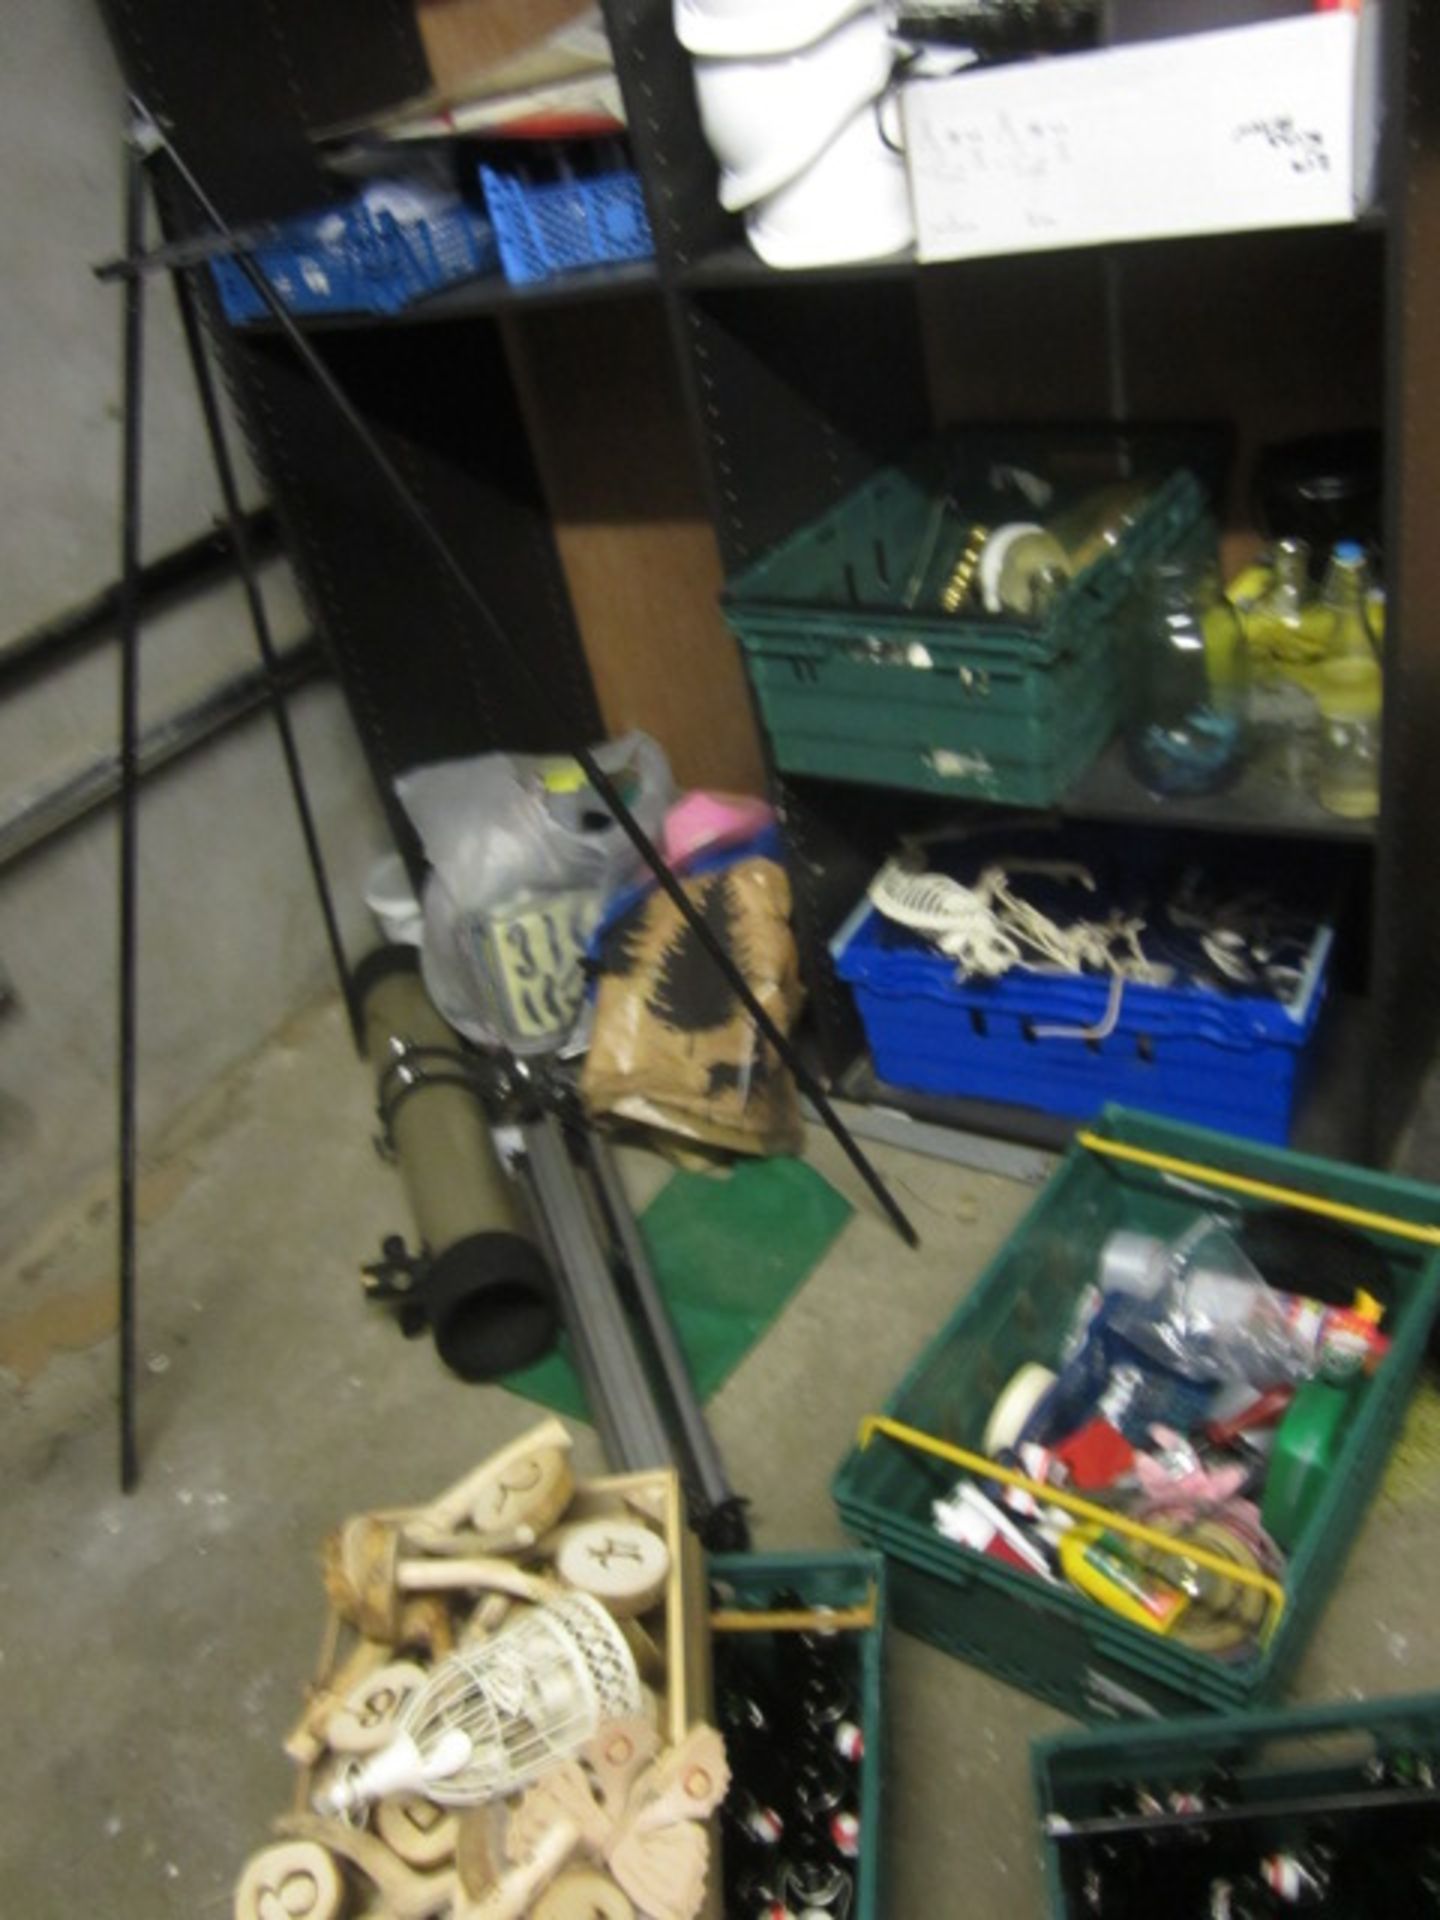 3 x Aluminium framed storage racks and miscellaneous contents of room including wall mounted boars - Image 6 of 9